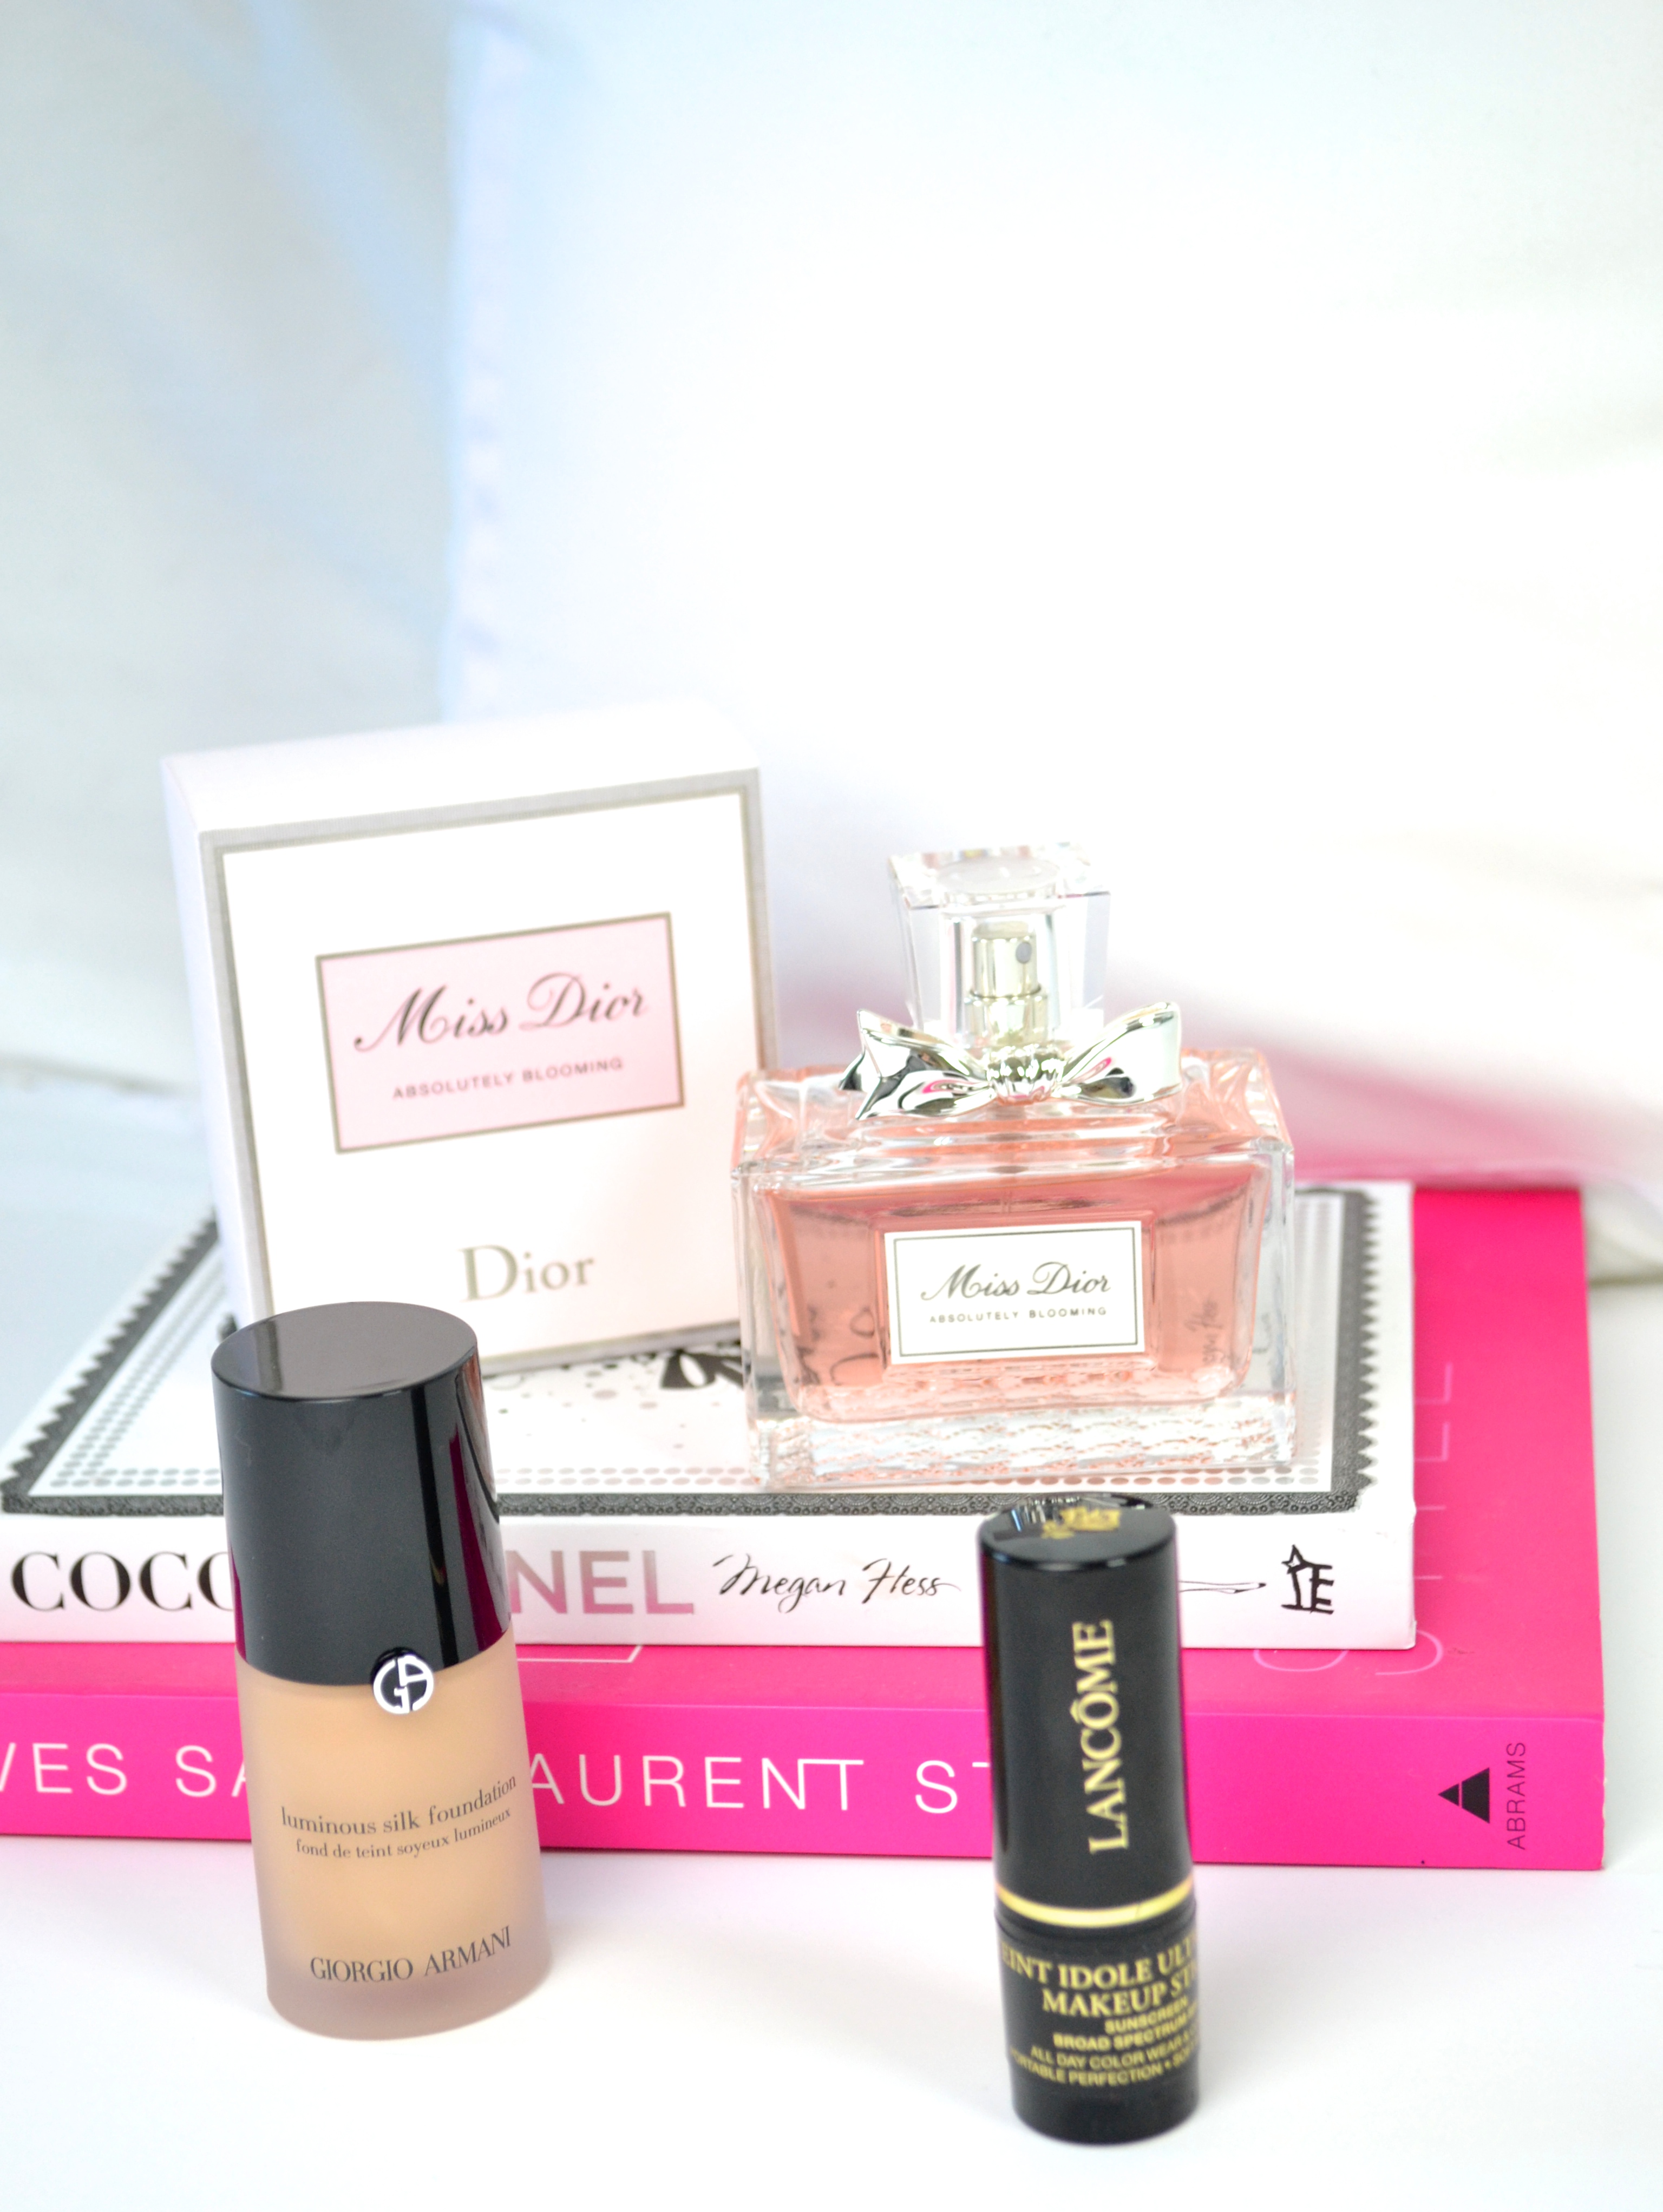 Sephora Beauty Buys |giorgio armani foundation, lance foundation stick, and Dior Absolutely Blooming Perfume|